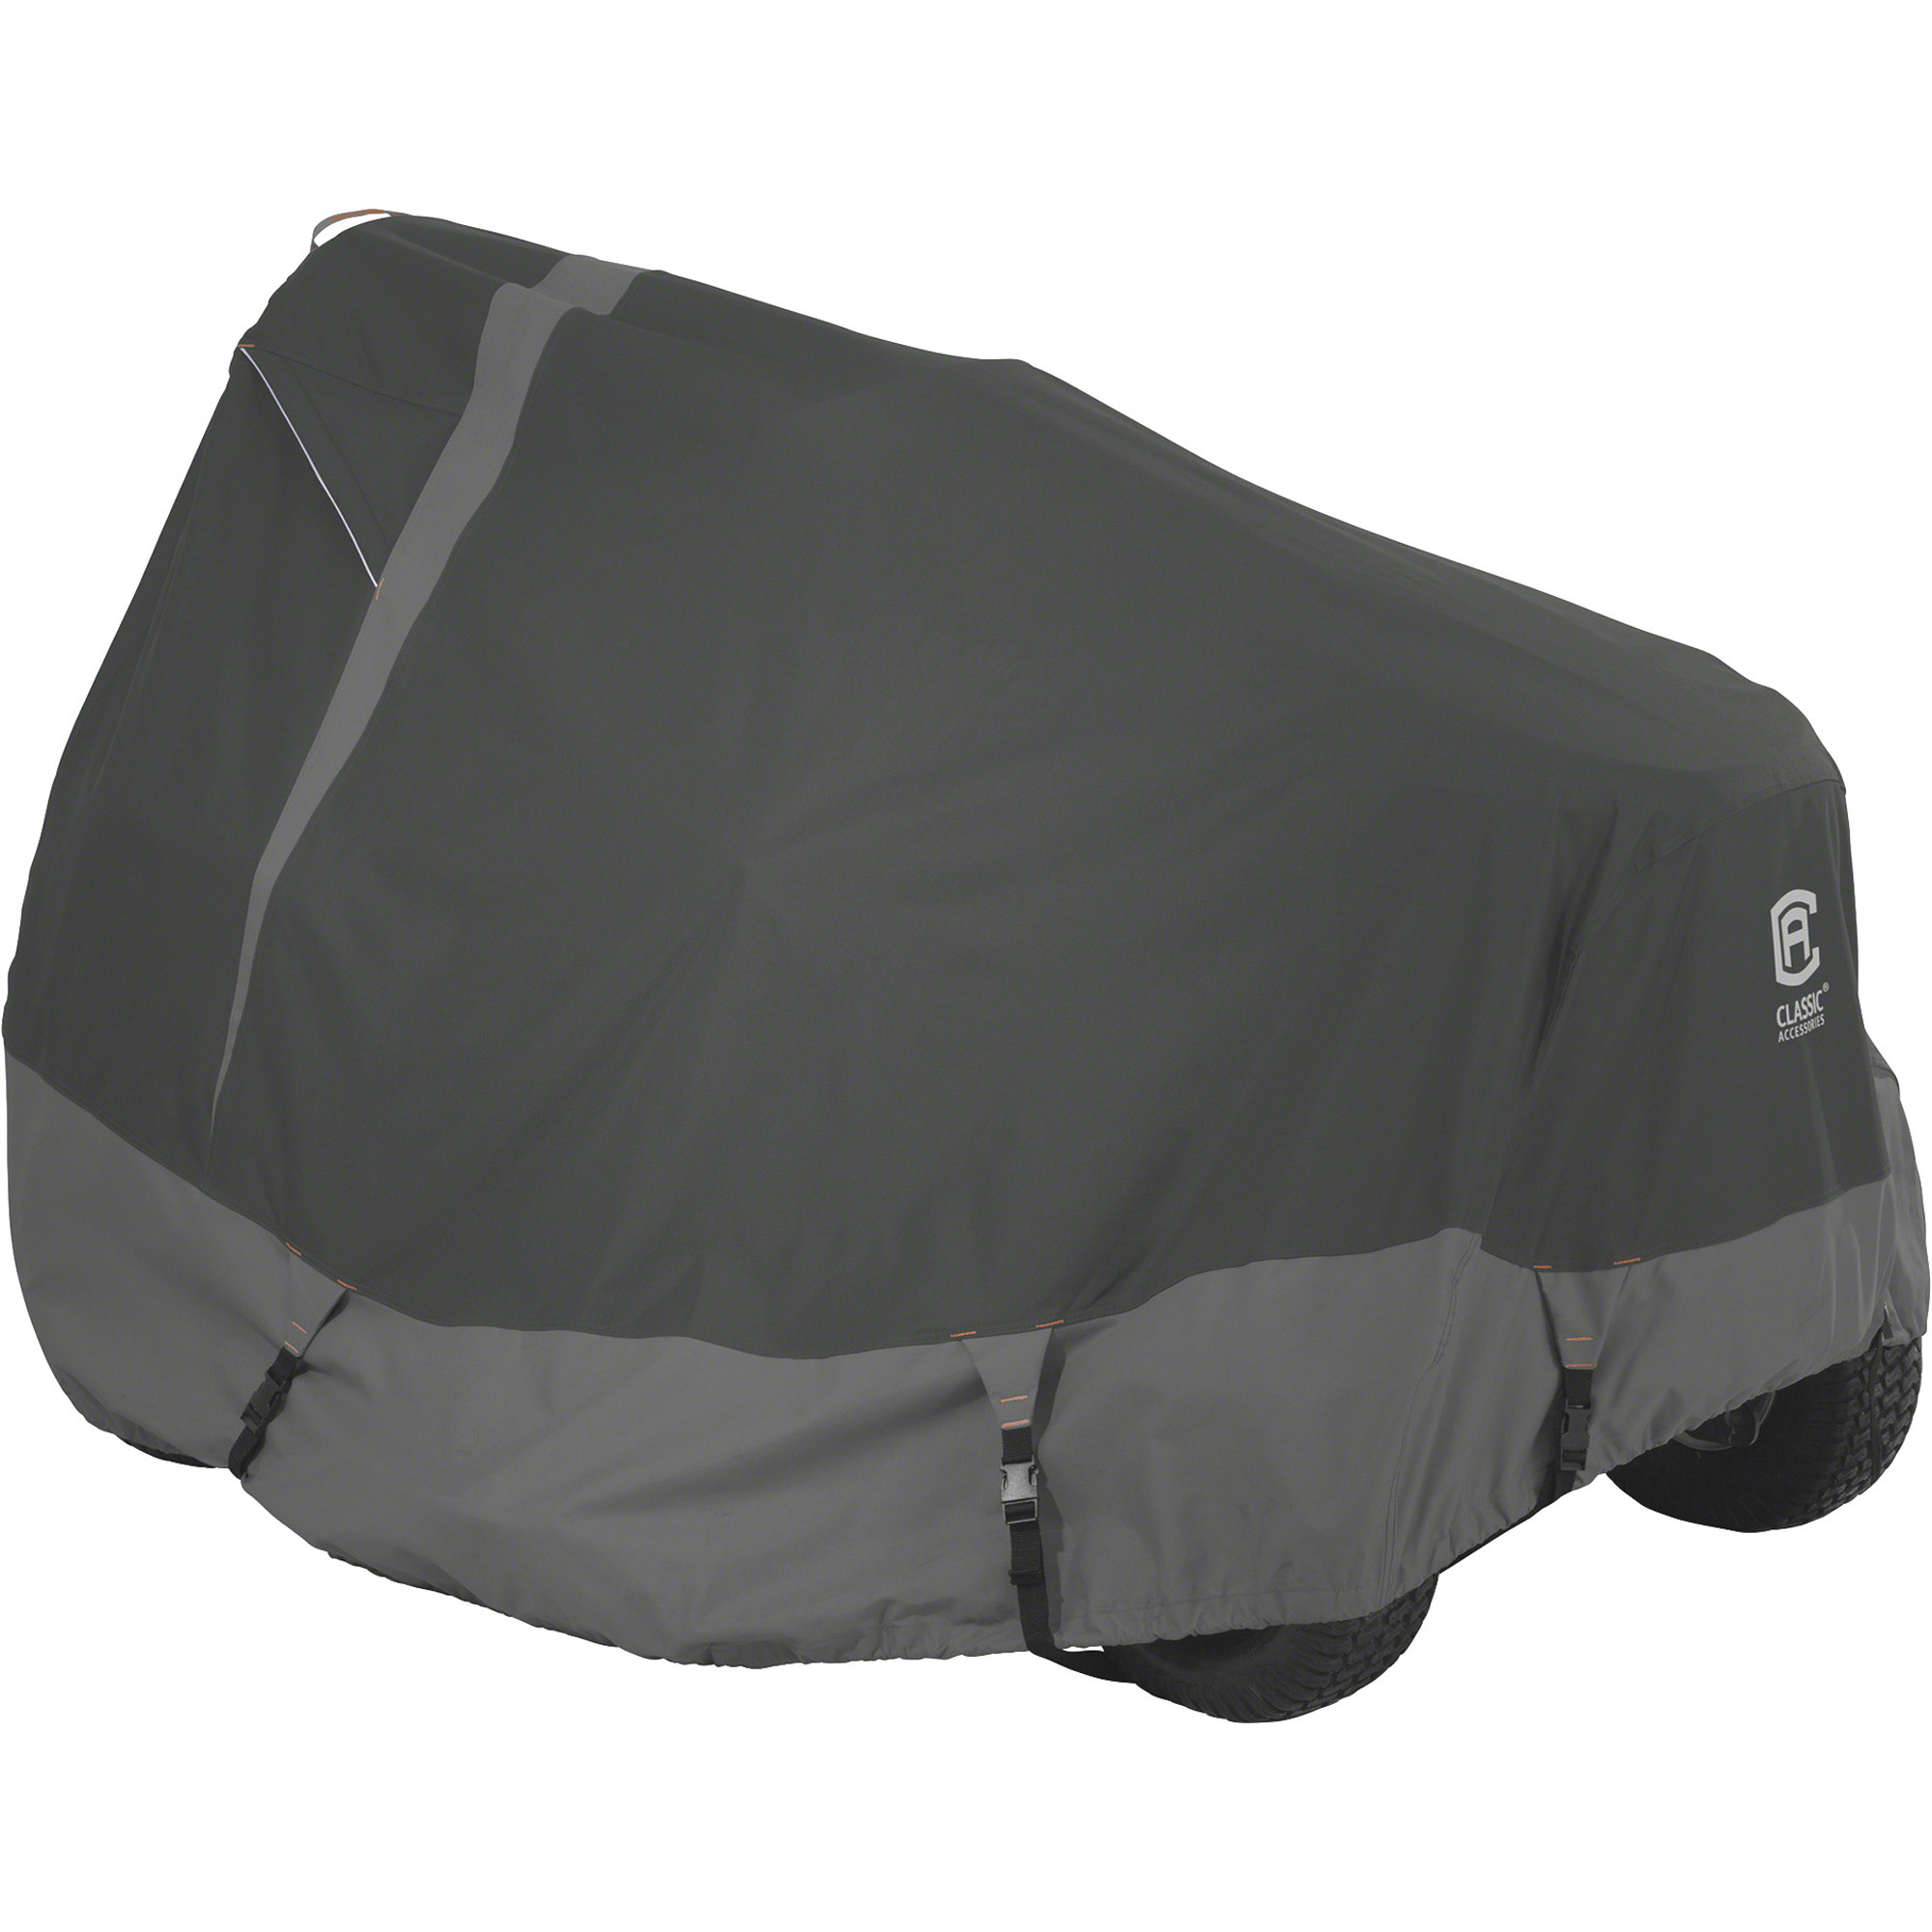 Classic Accessories Heavy-Duty Tractor Cover, Large, Model 52-149-380401-00